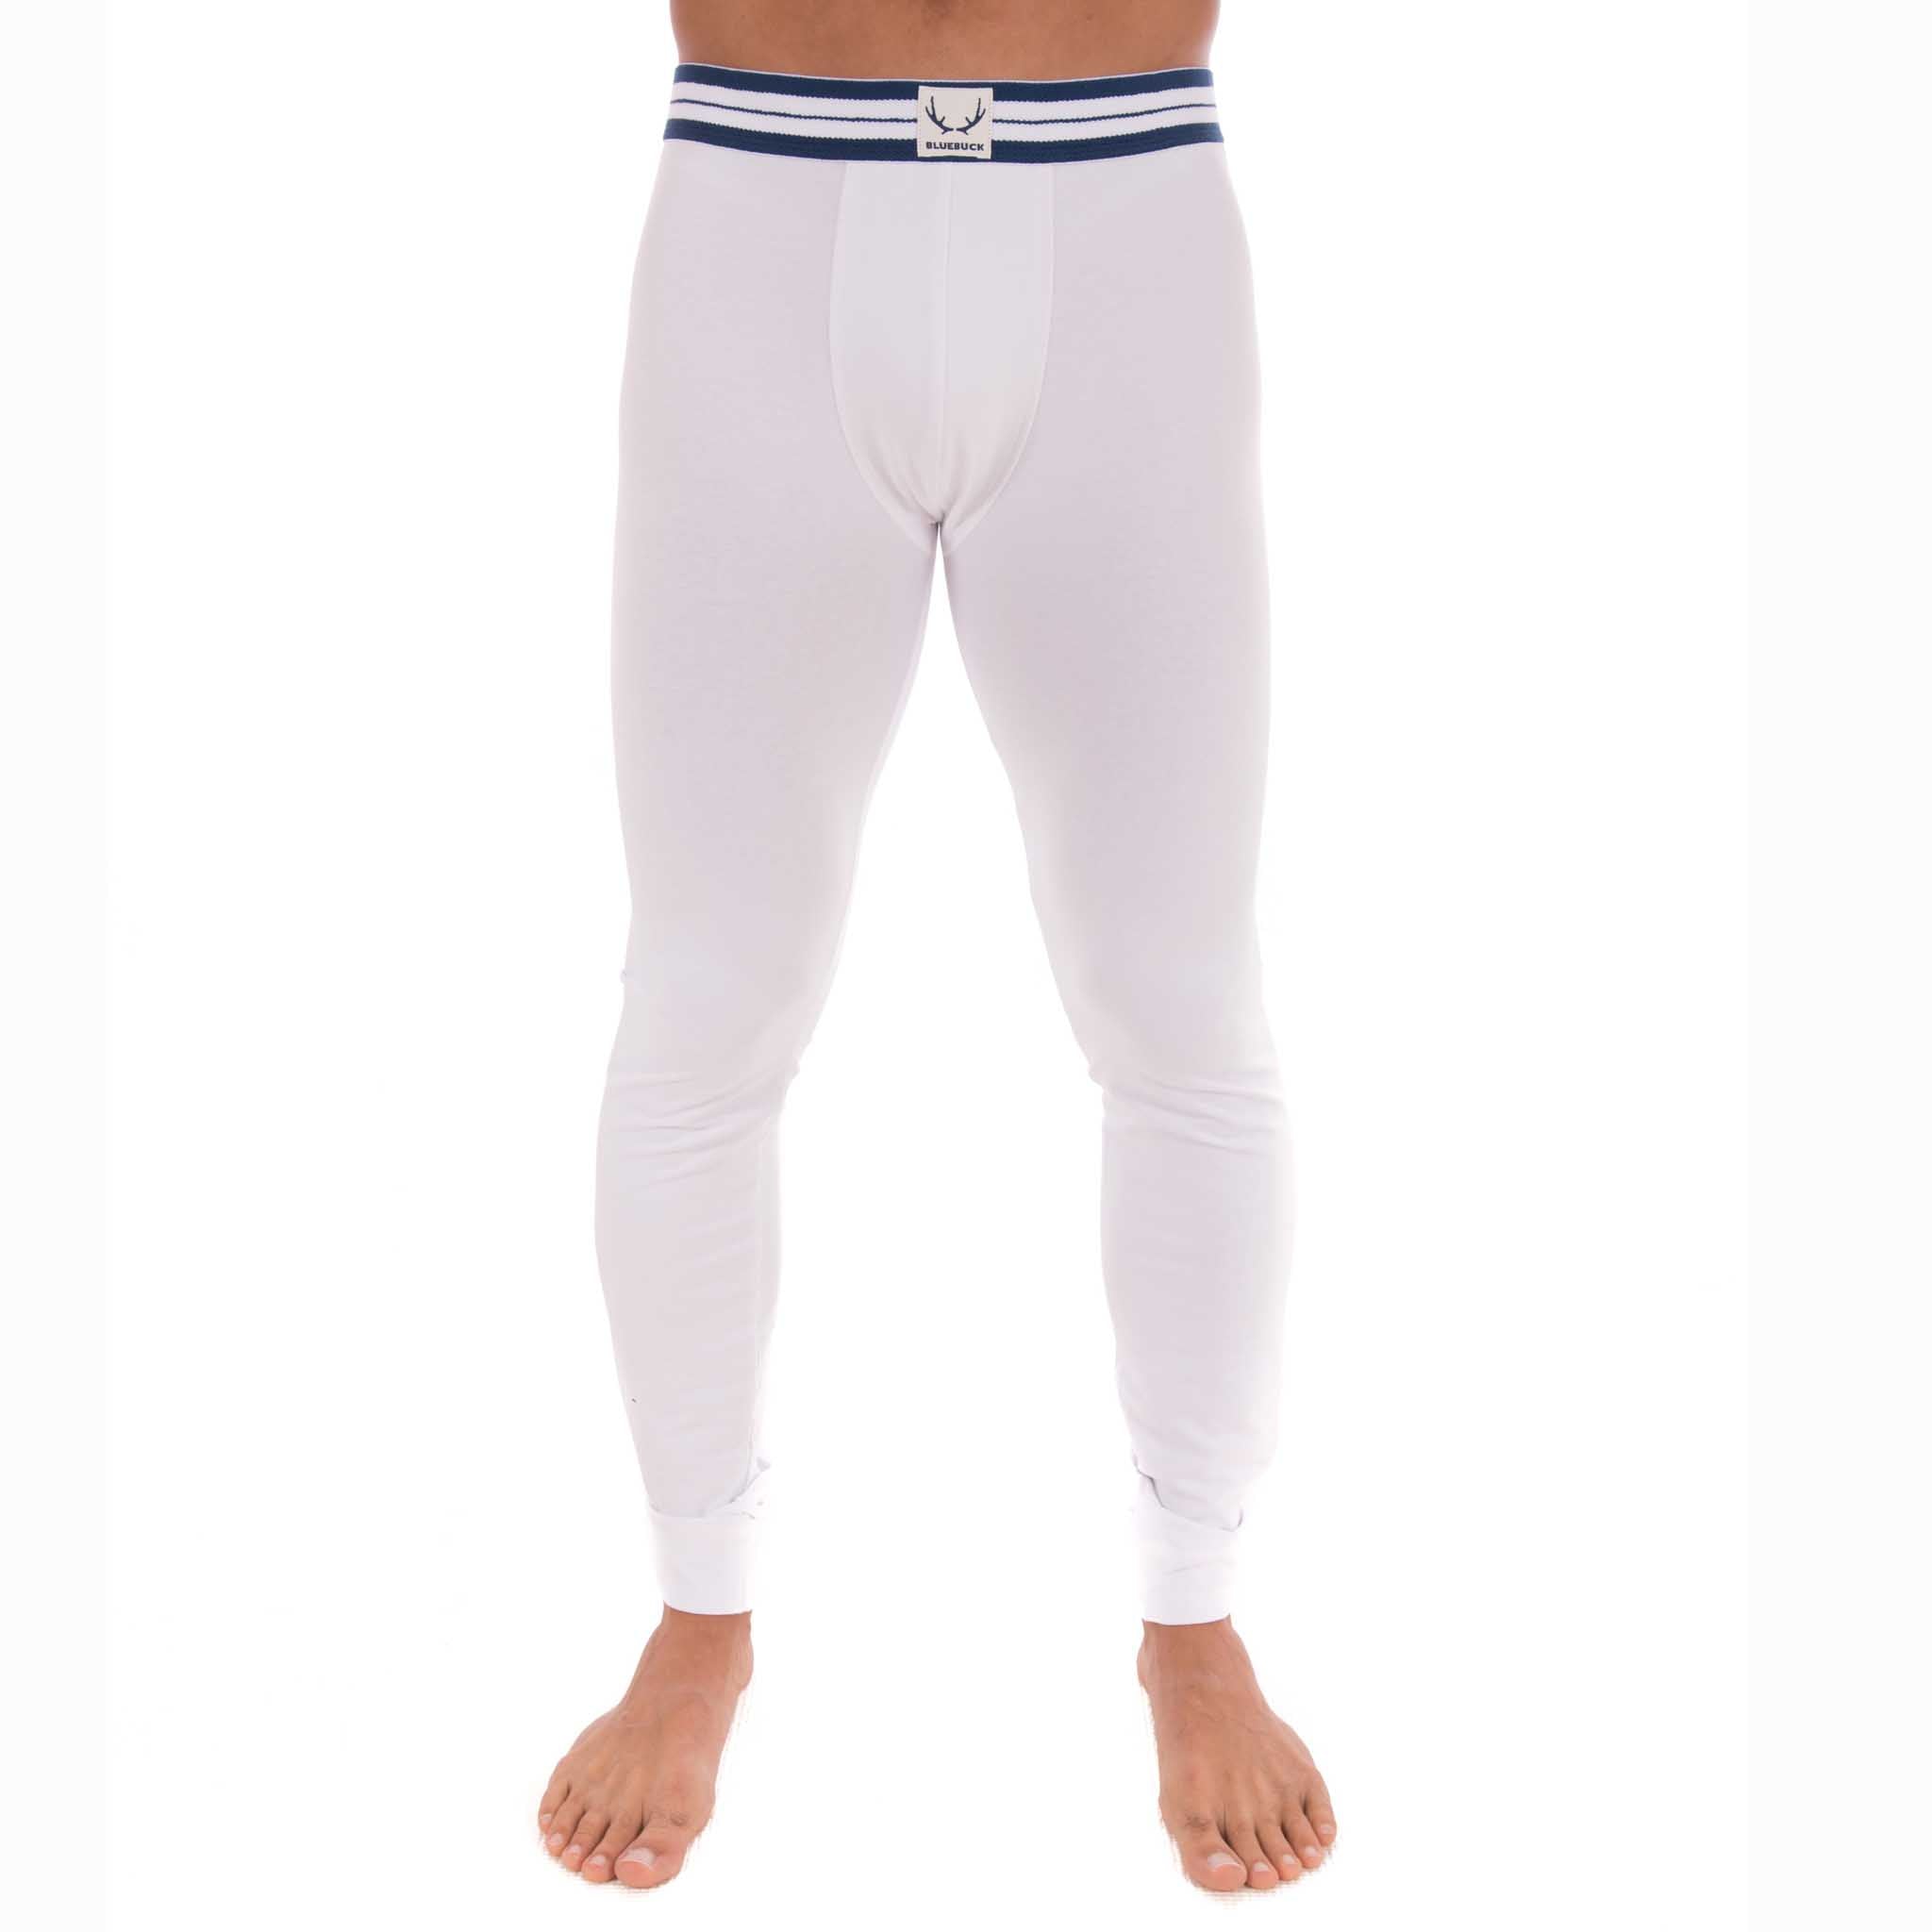 White leggings made from organic cotton from Bluebuck